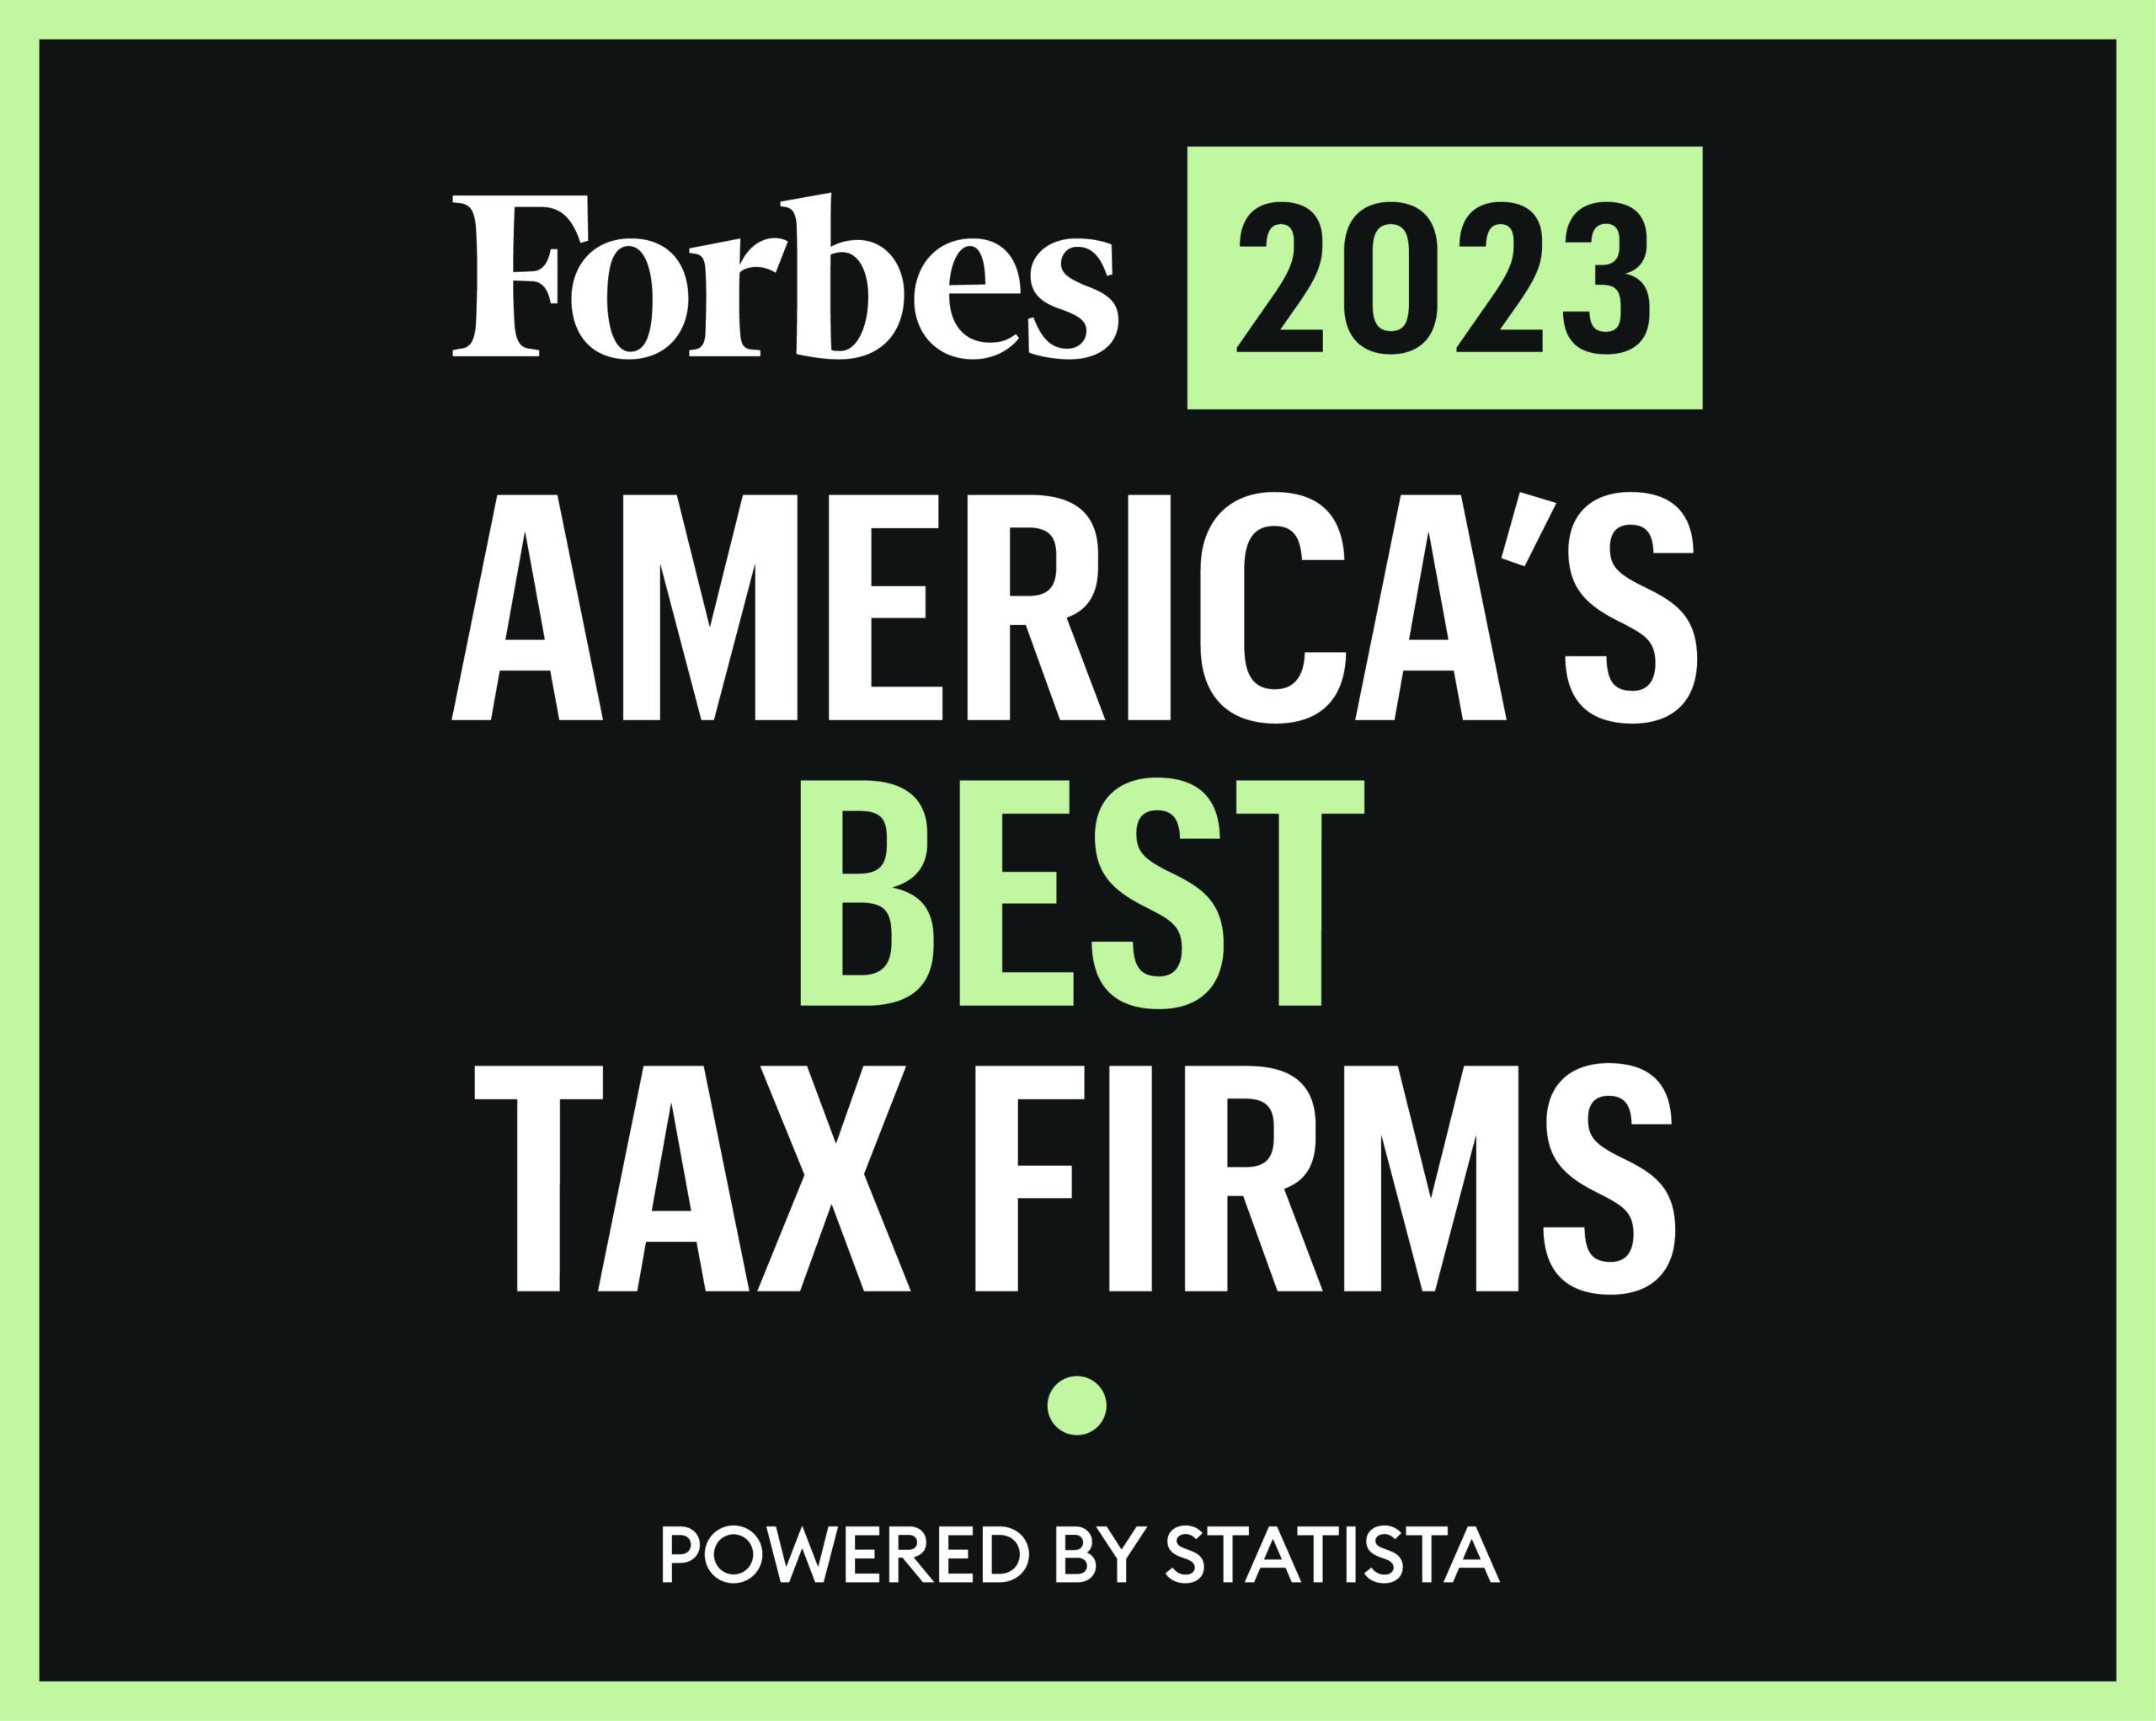 Forbes 2023 America's Best Tax Firms